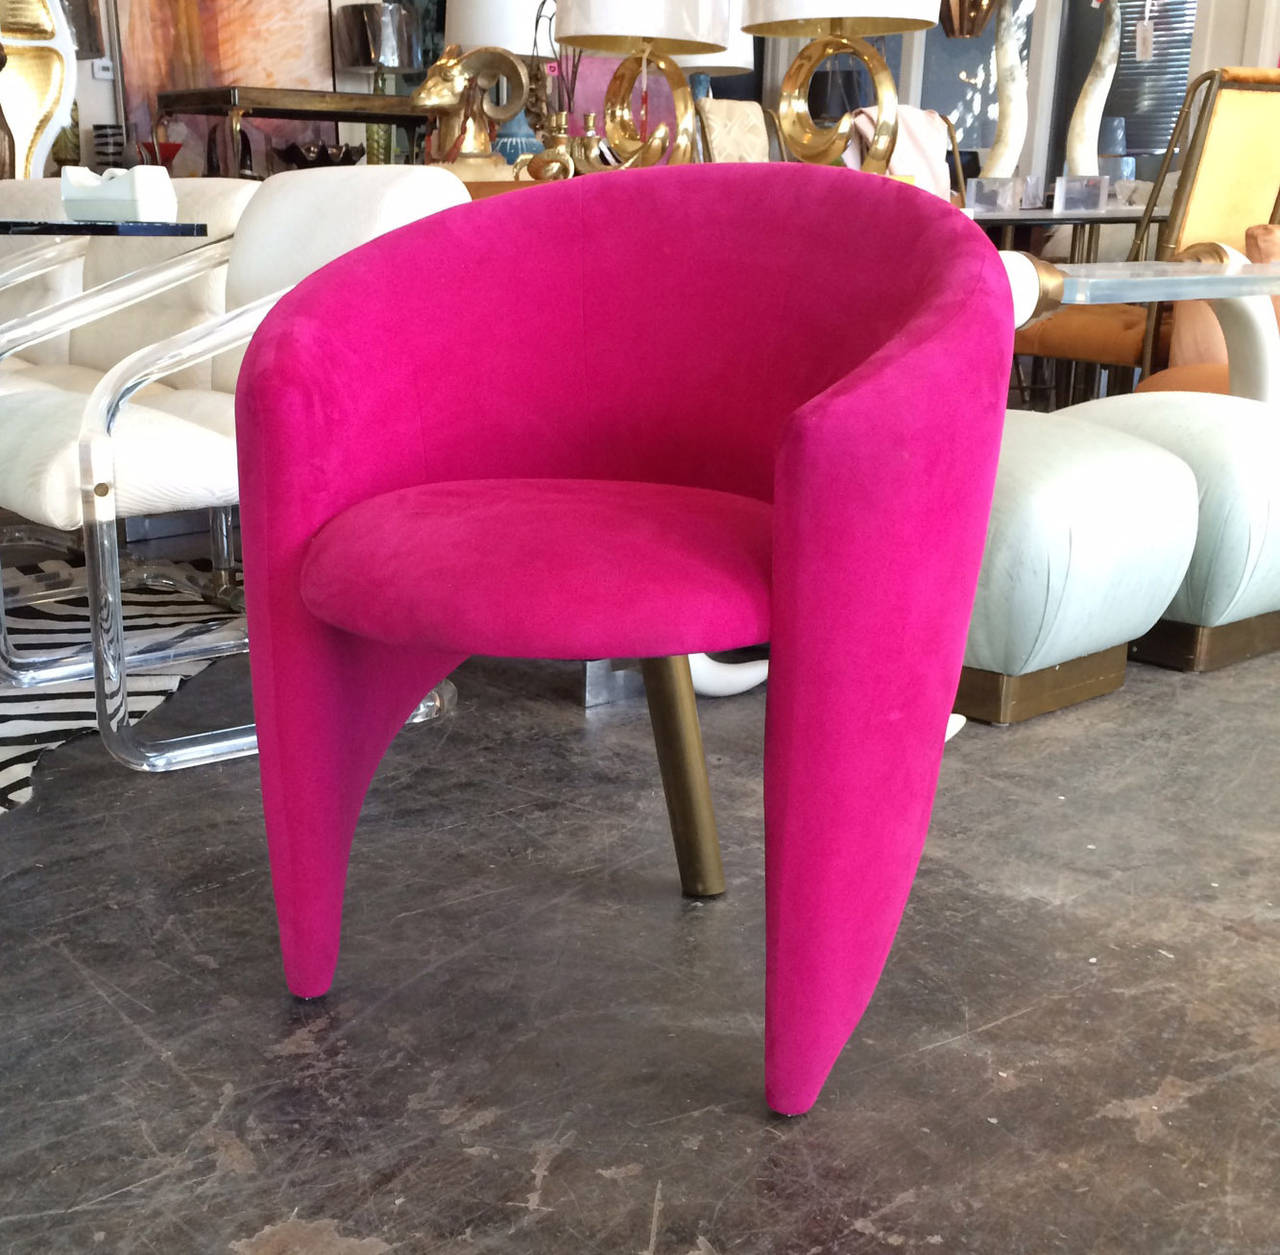 Very sculptural 3 legged chairs in the style of Kelly Wearstler. This pair of chairs are upholstered in hot pink and are accented with a brass legs. The upholstery is in good vintage condition with minor fabric issues for age and use

dimensions: